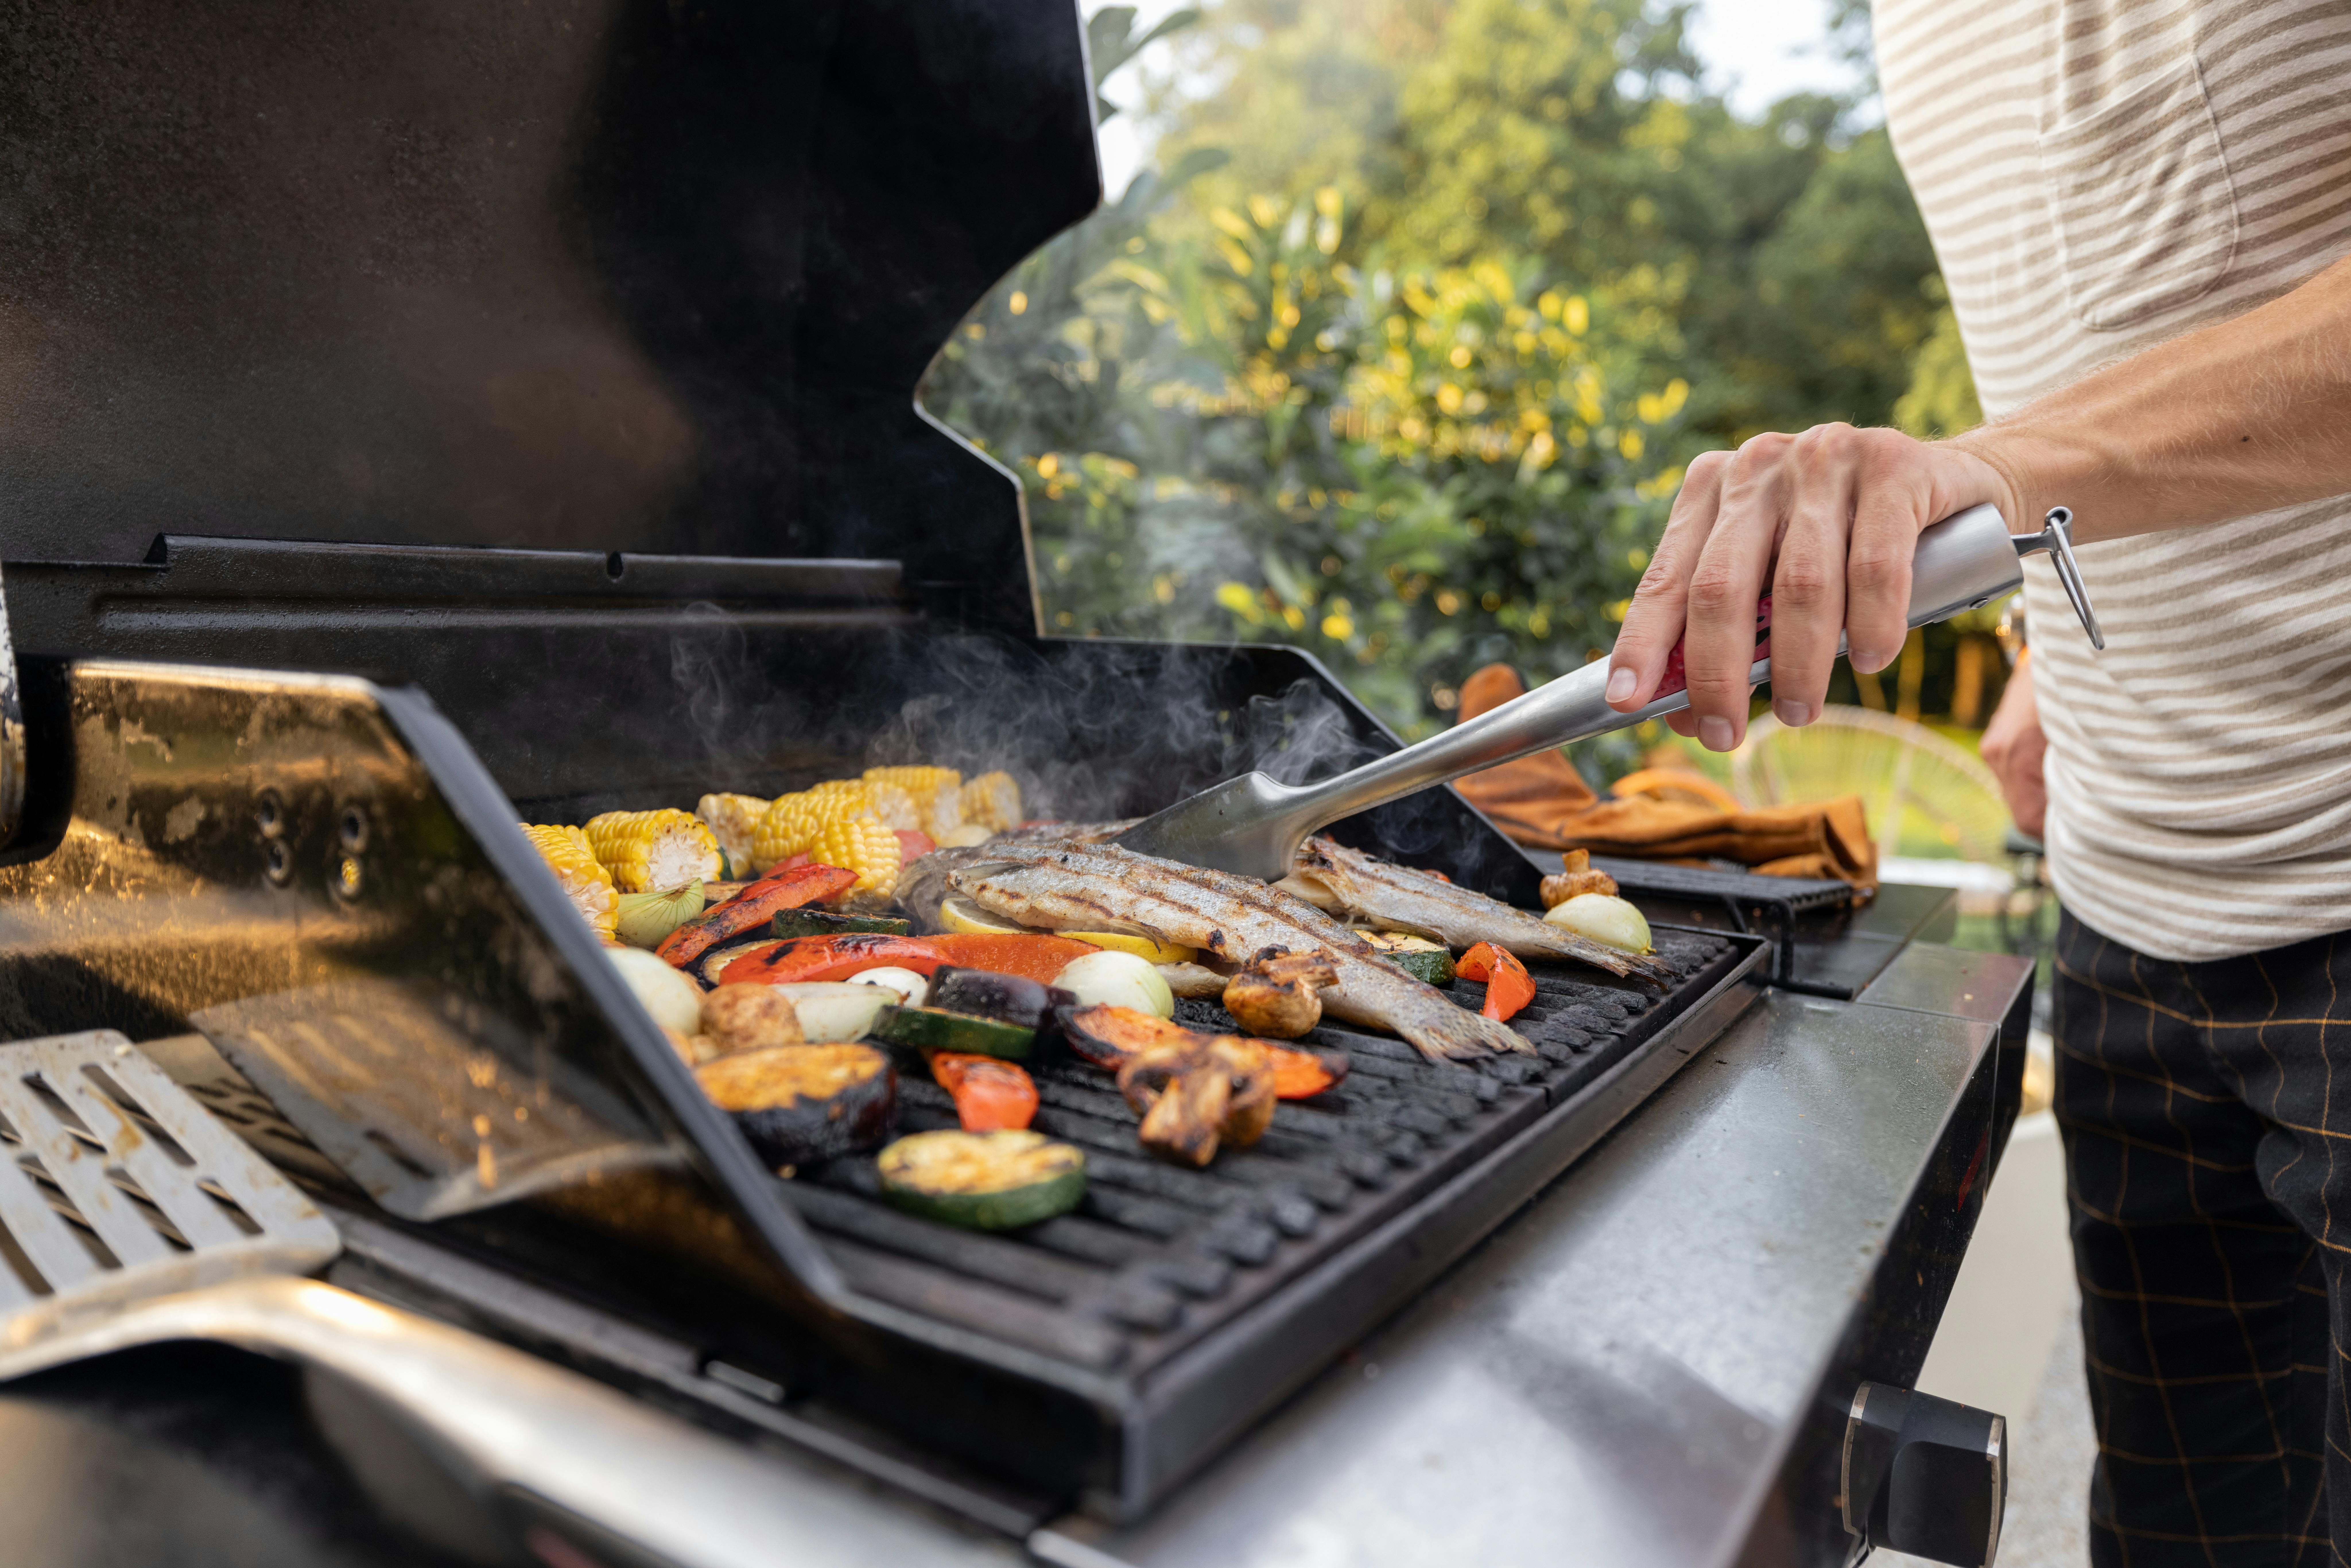 Types Of Outdoor Grills and How to Choose the Best One